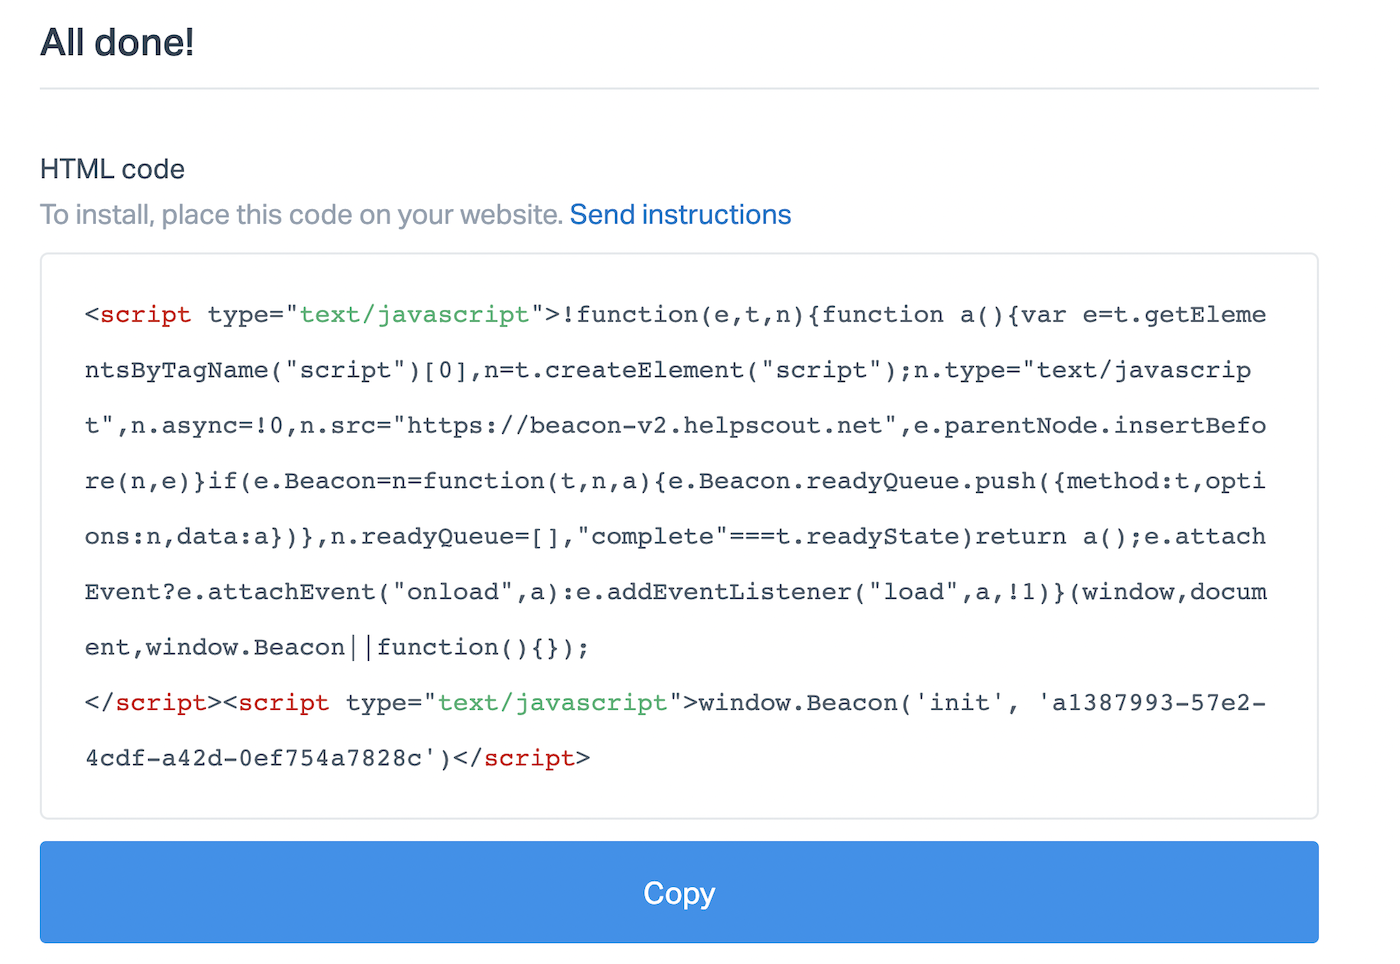 Beacon code snippet